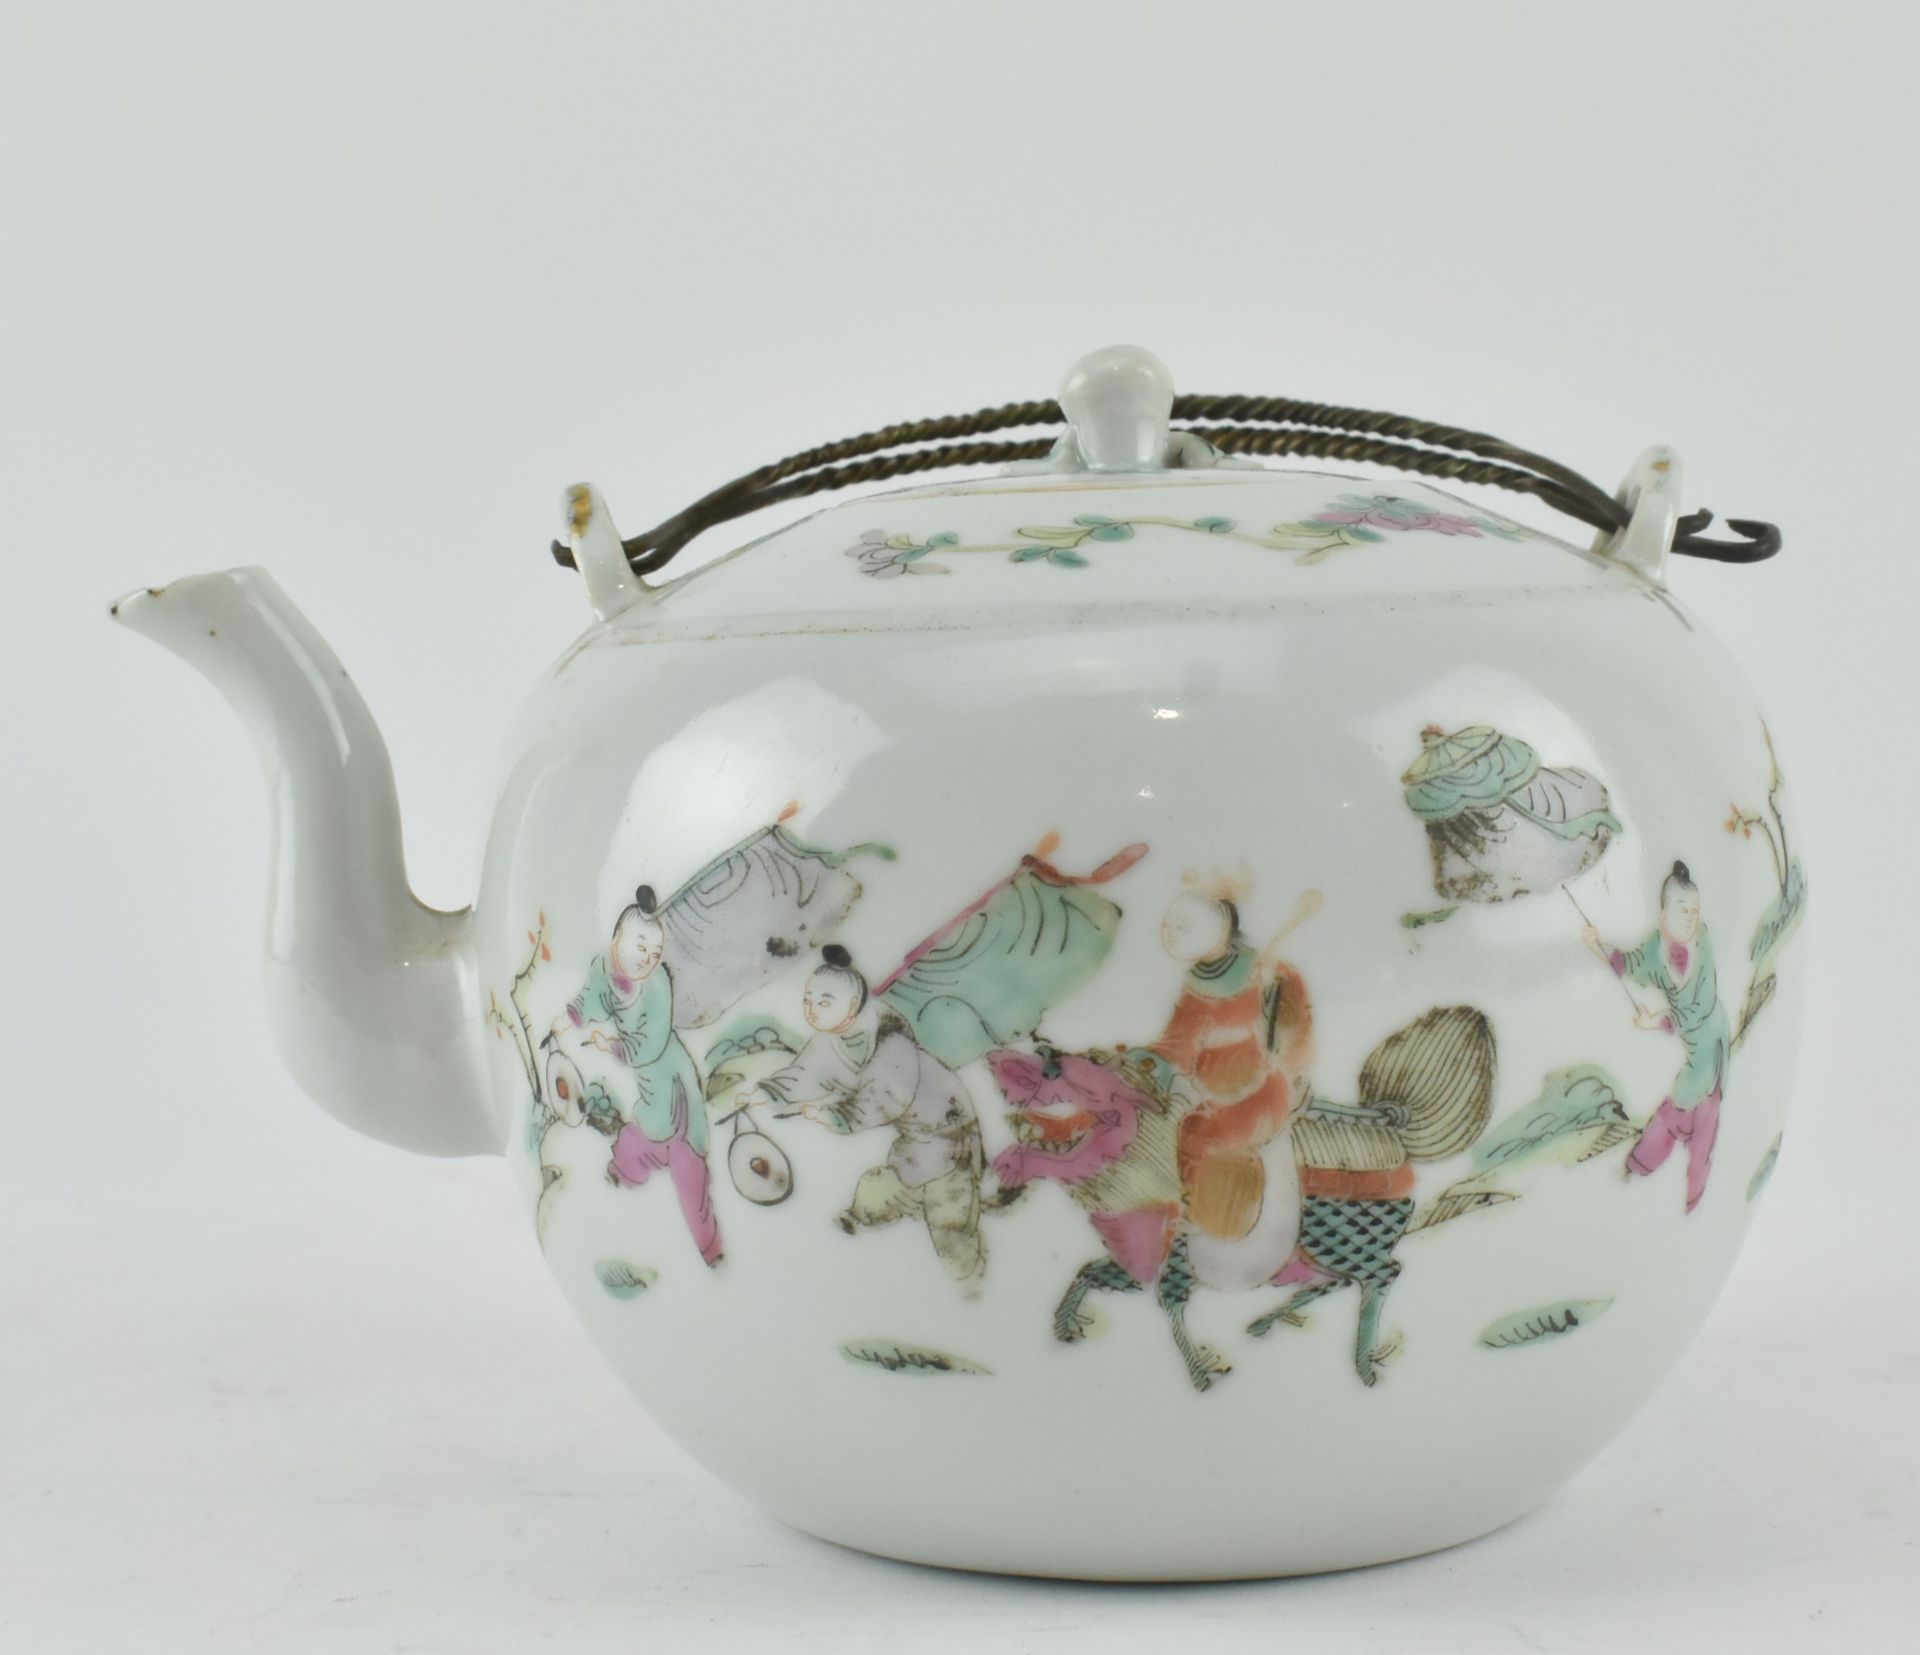 LATE QING DYNASTY FAMILE ROSE TEAPOT 晚清 粉彩戏婴茶壶 - Image 2 of 7